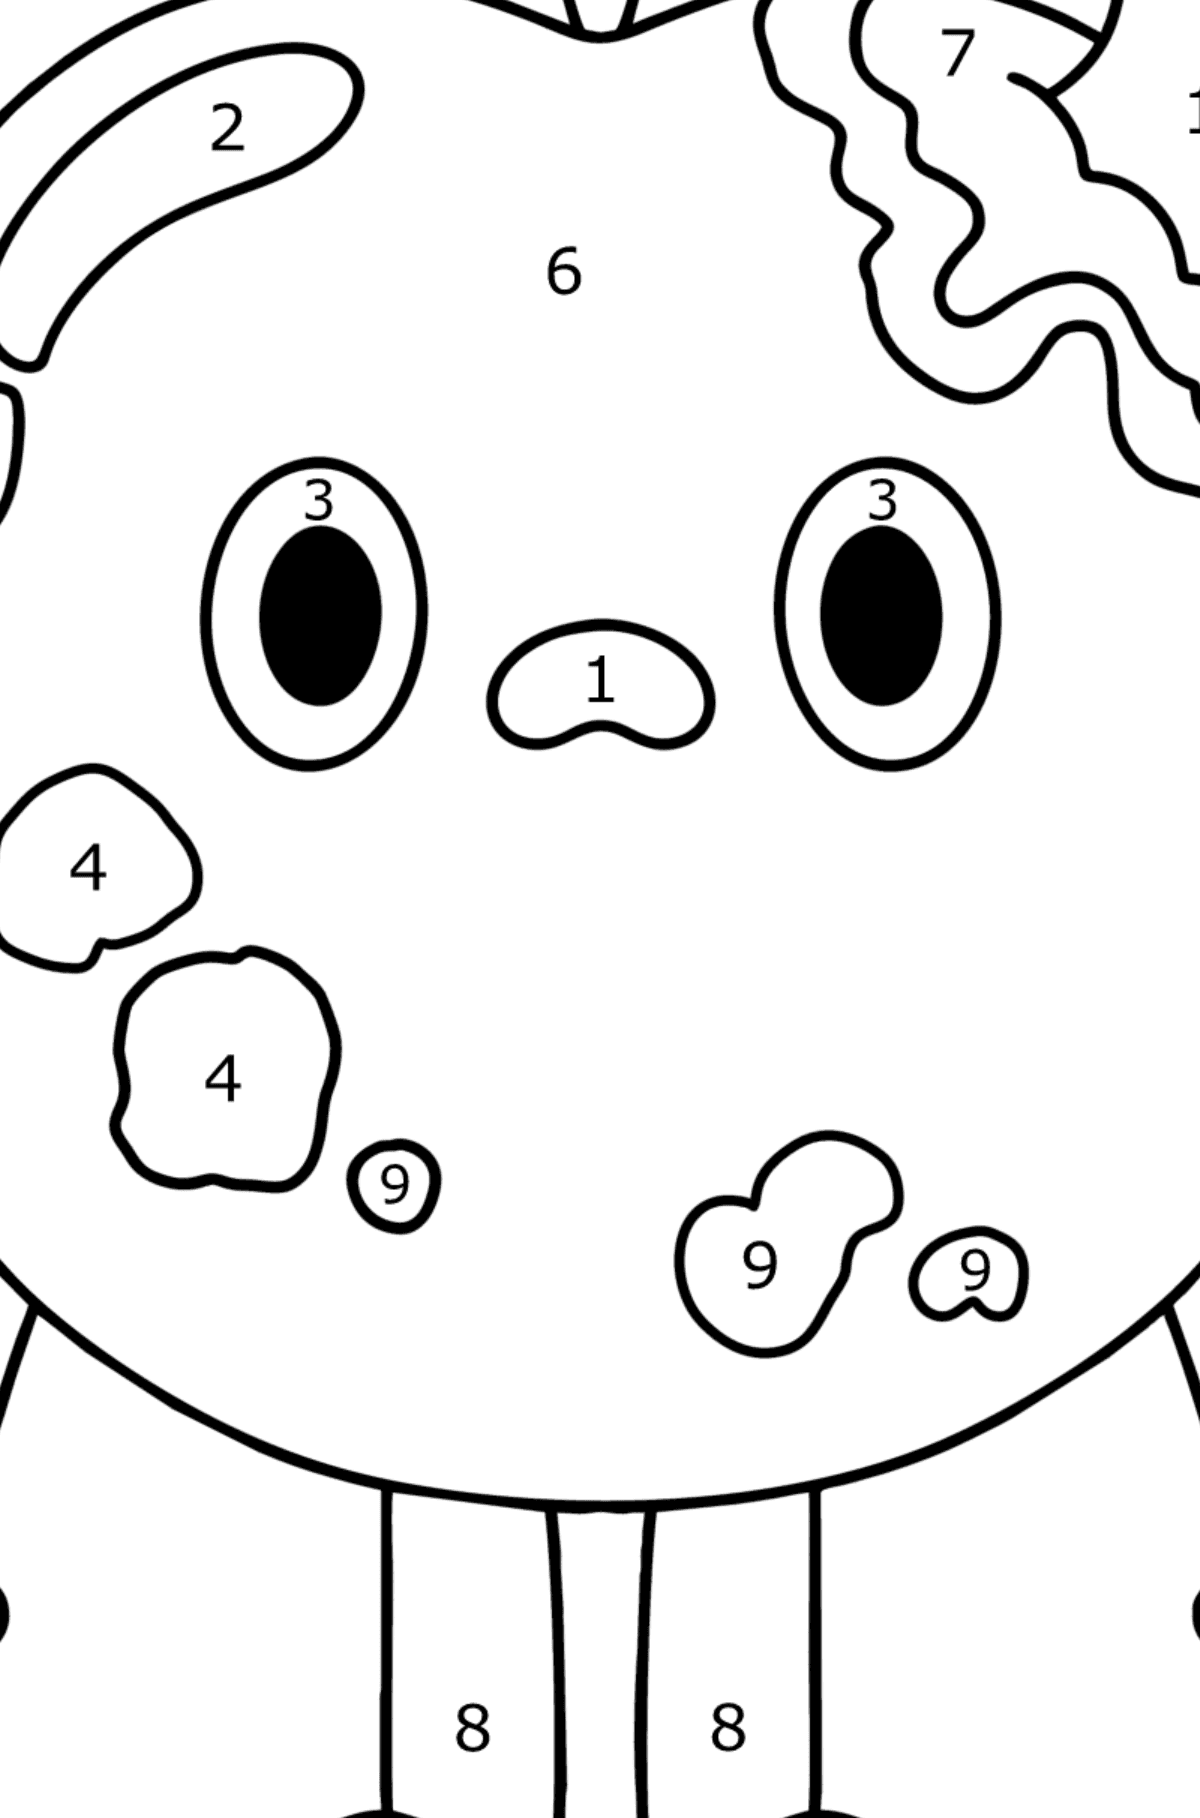 Coloring page Tocaboca heroes 02 - Coloring by Numbers for Kids